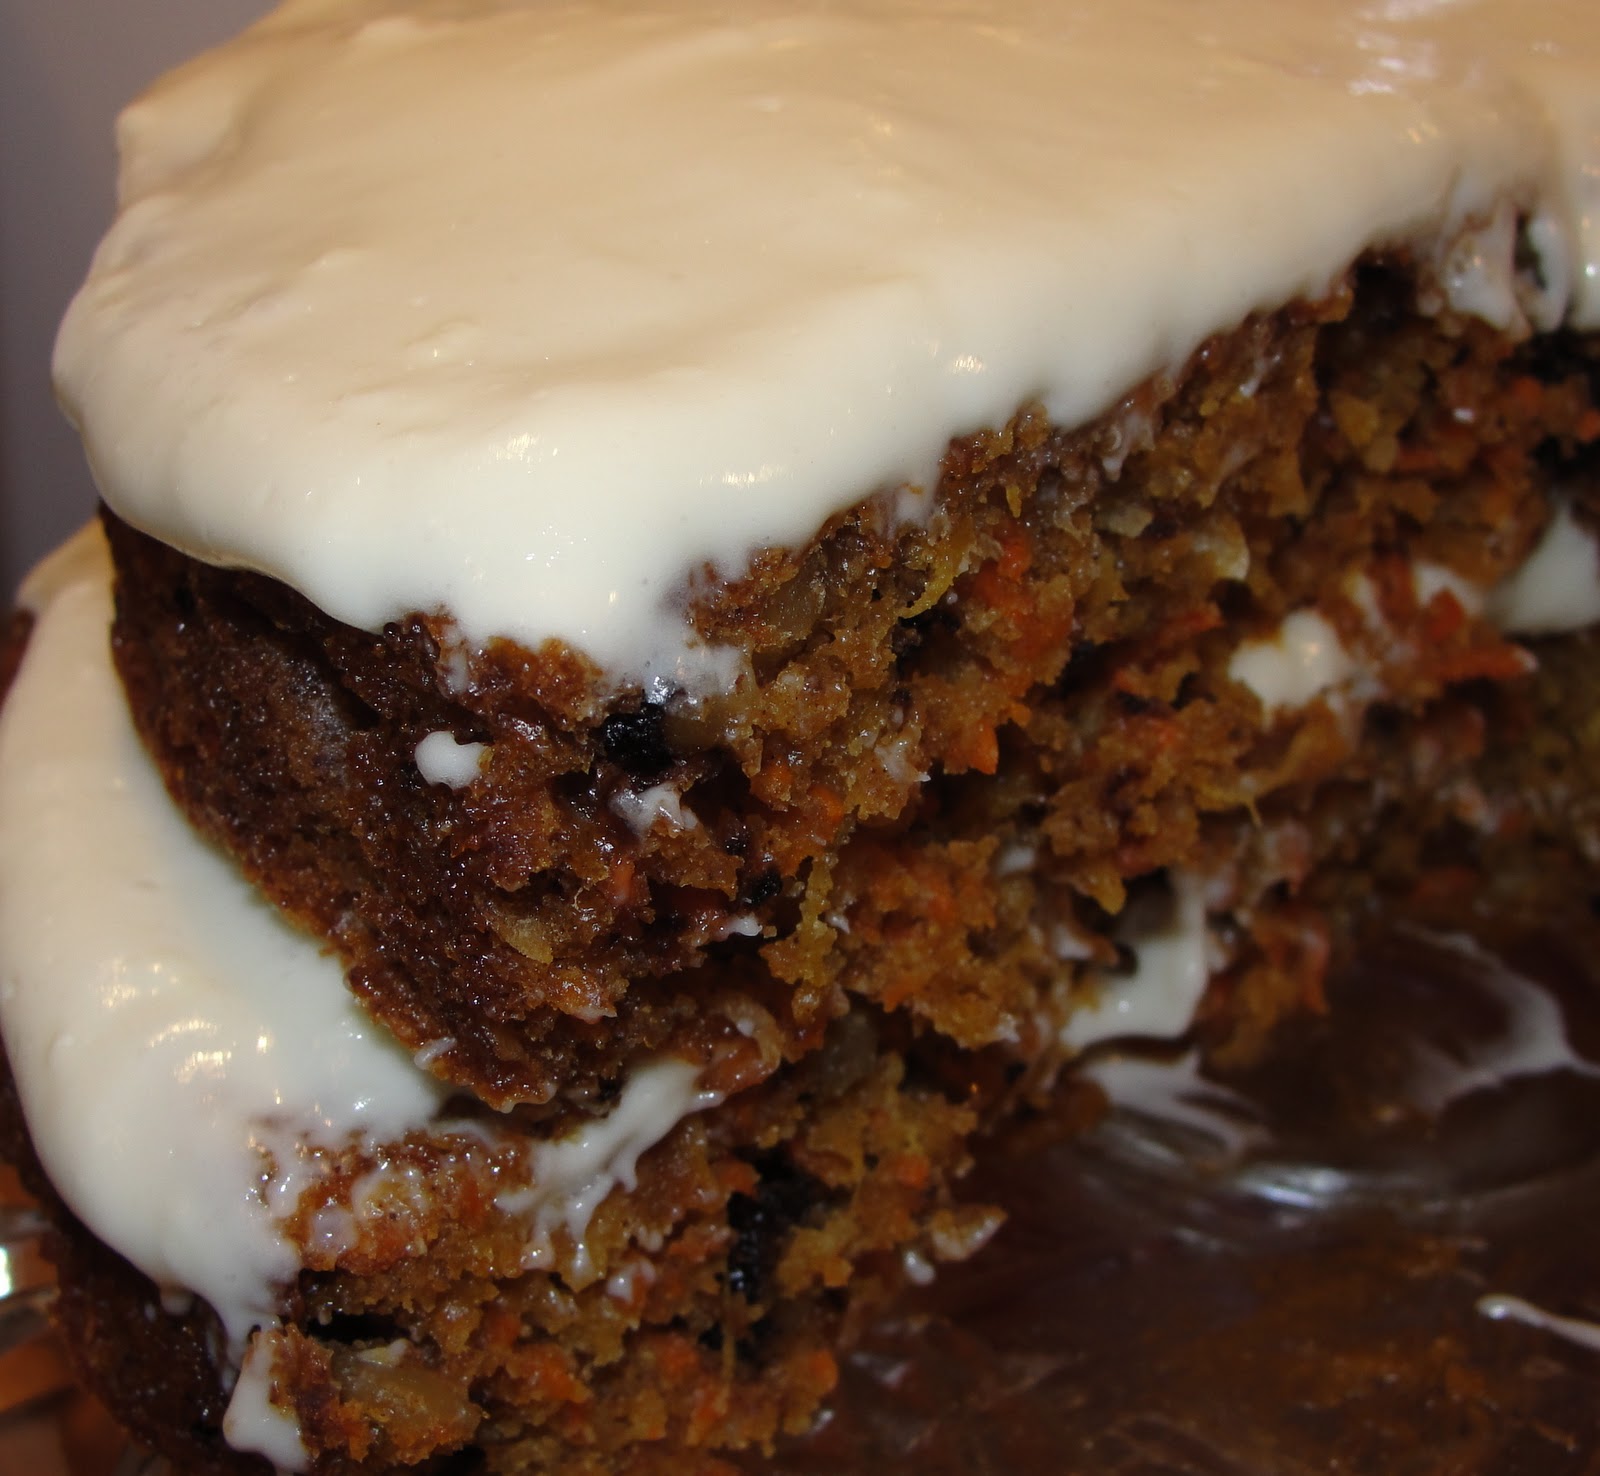 Weight Watchers Carrot Cake Slices